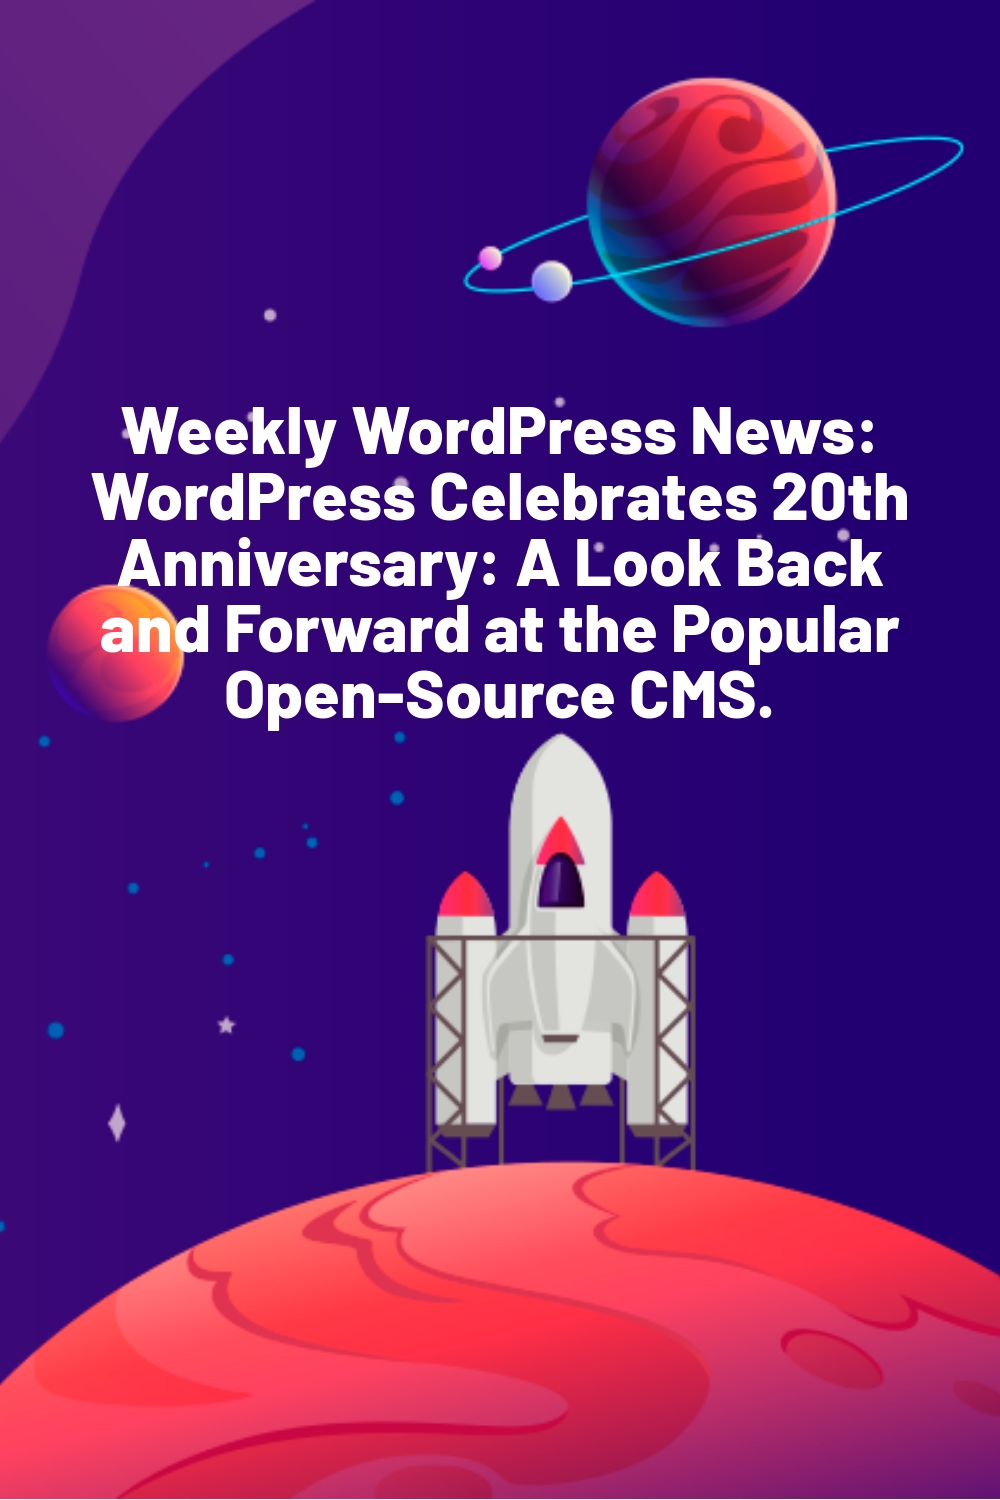 Weekly WordPress News: WordPress Celebrates 20th Anniversary: A Look Back and Forward at the Popular Open-Source CMS.